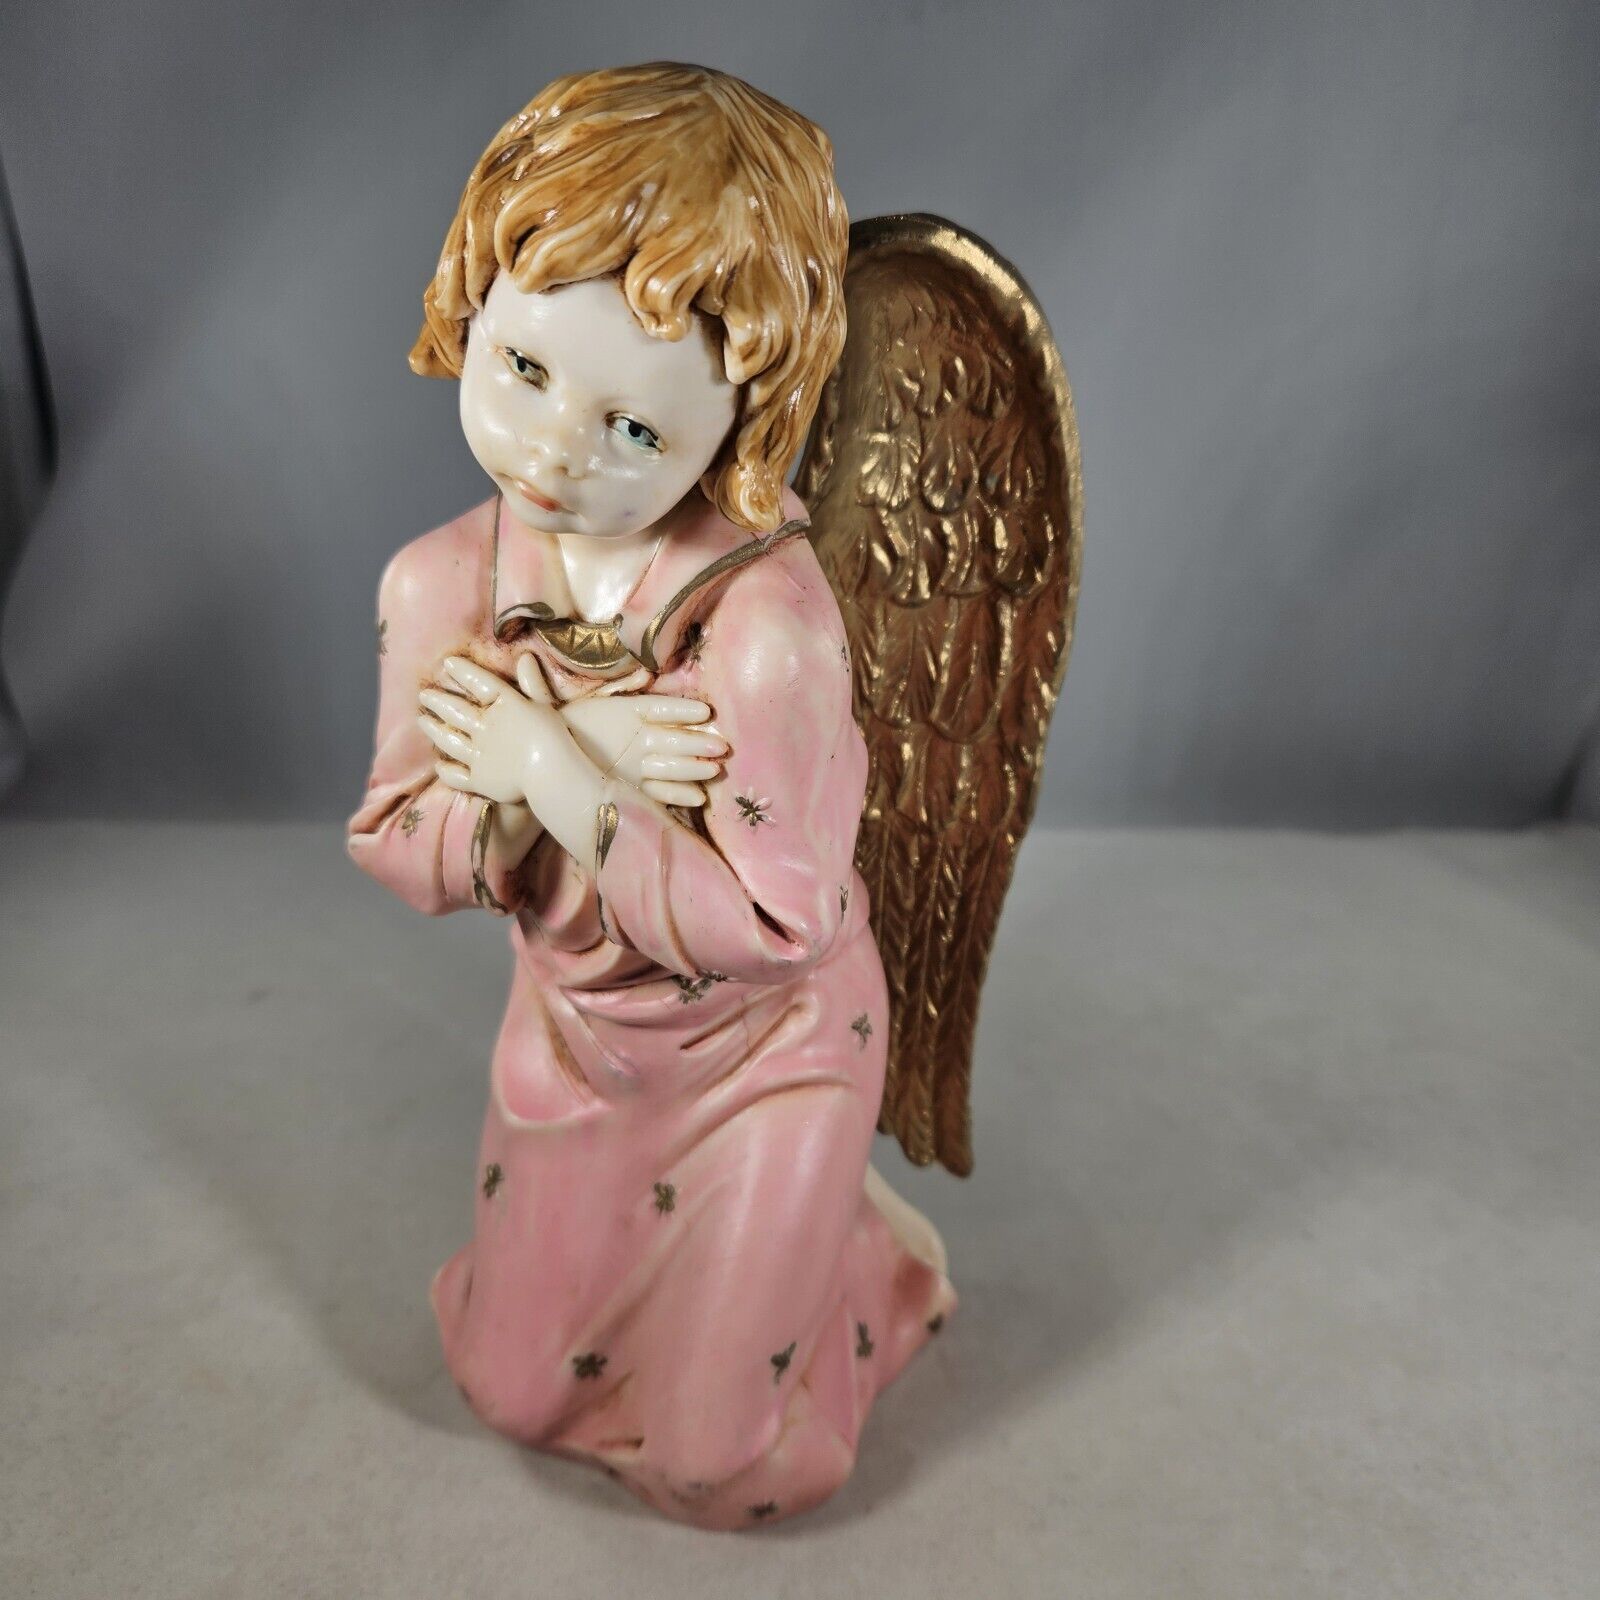 Vintage Lello Kneeling Angel Figurine Large Gold Wings Italy 5501 8 inches Tall